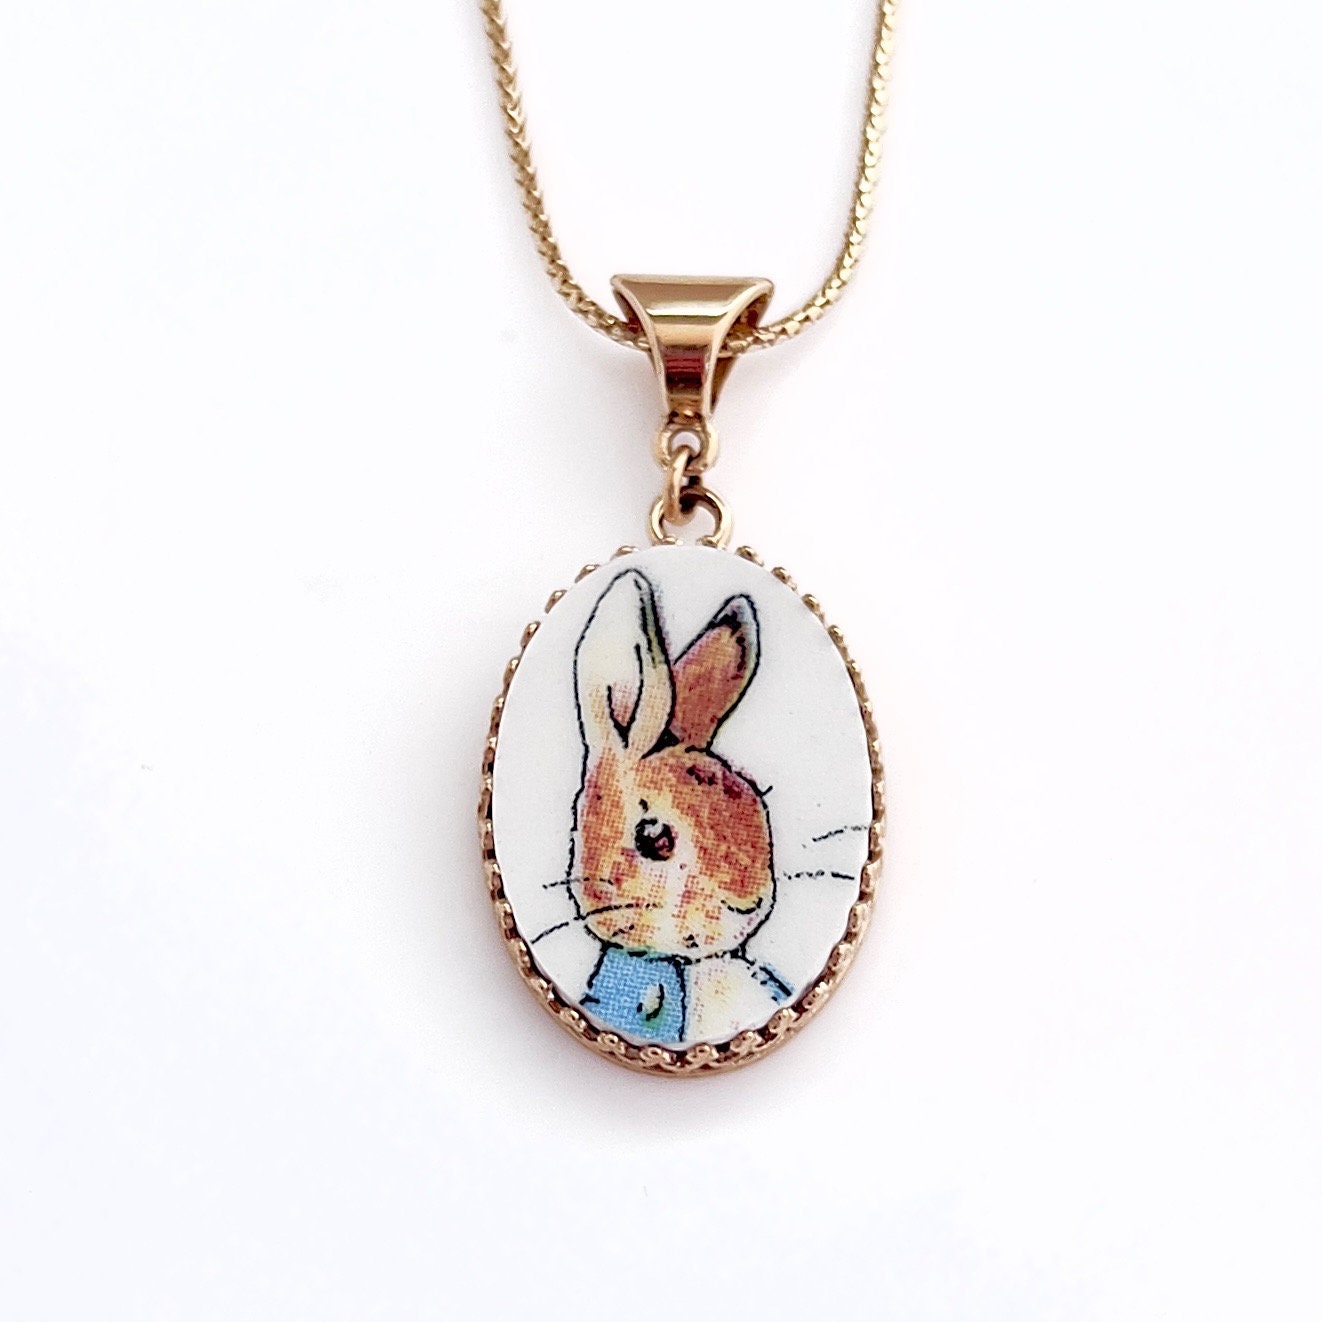 14k Solid Gold Peter Rabbit Pendant or Necklace, Beatrix Potter Broken China Jewelry, 20th Anniversary Gift for Wife